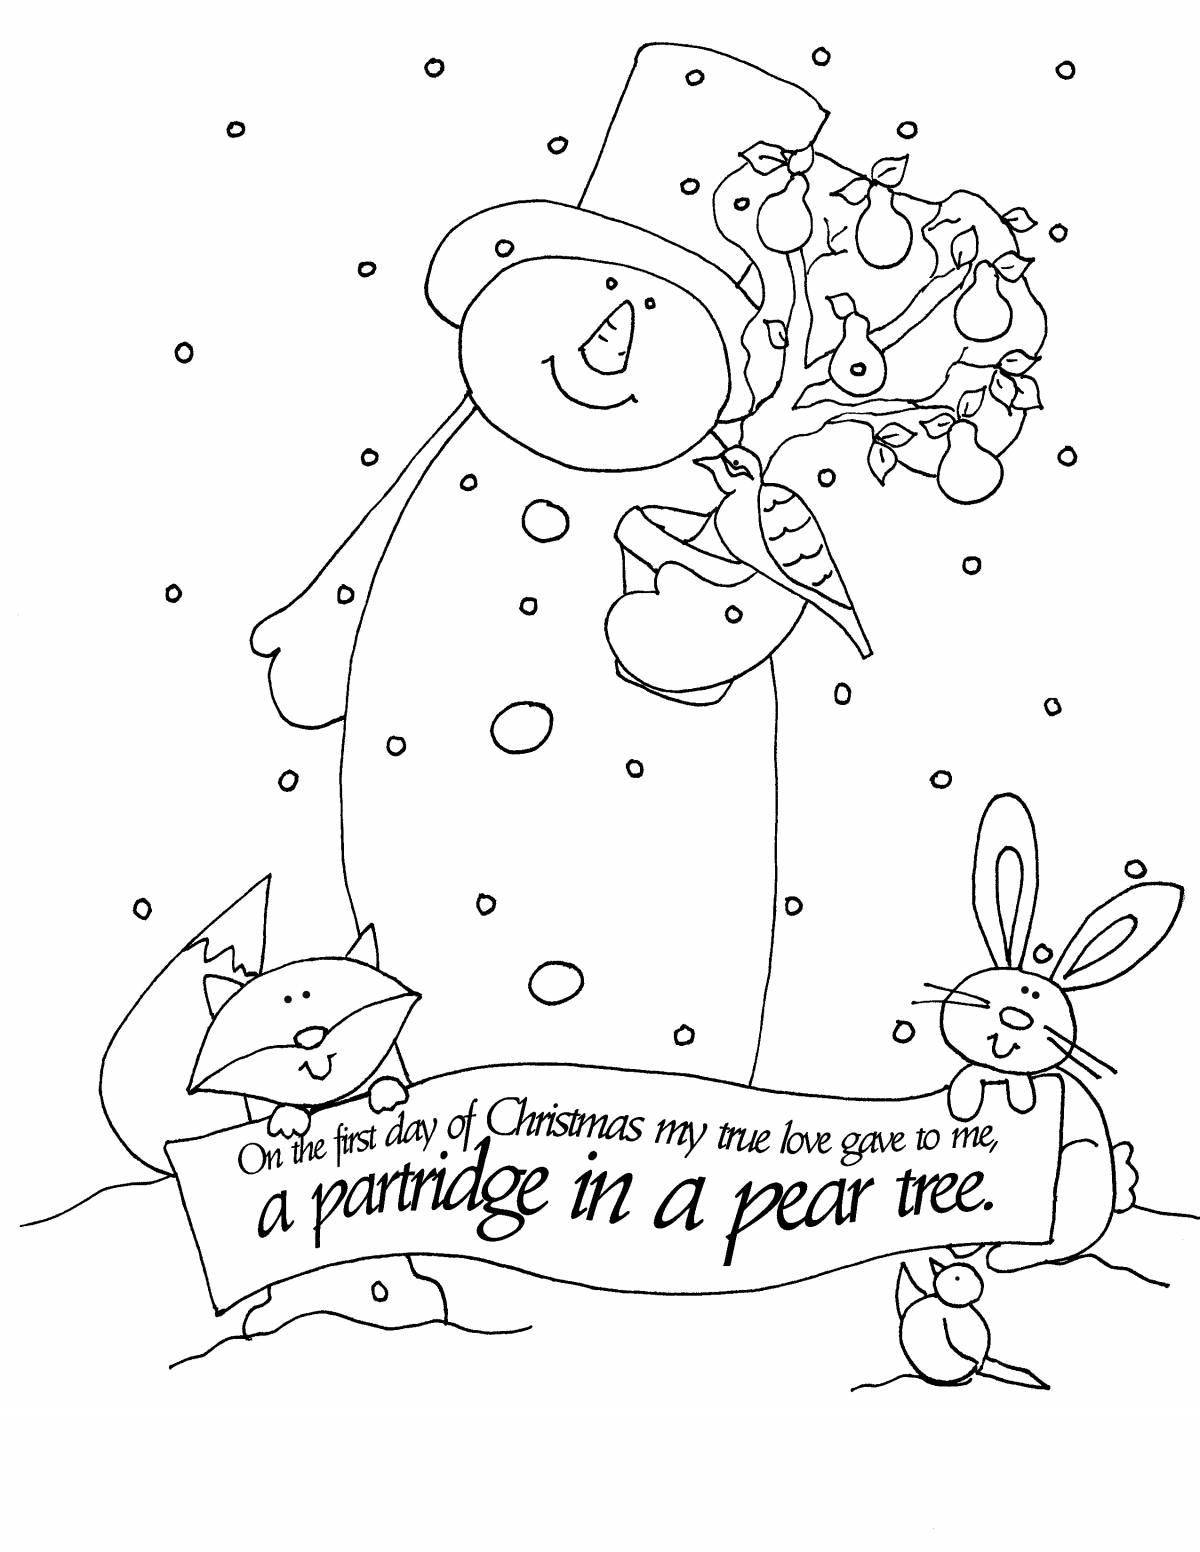 Glittering Christmas card coloring book